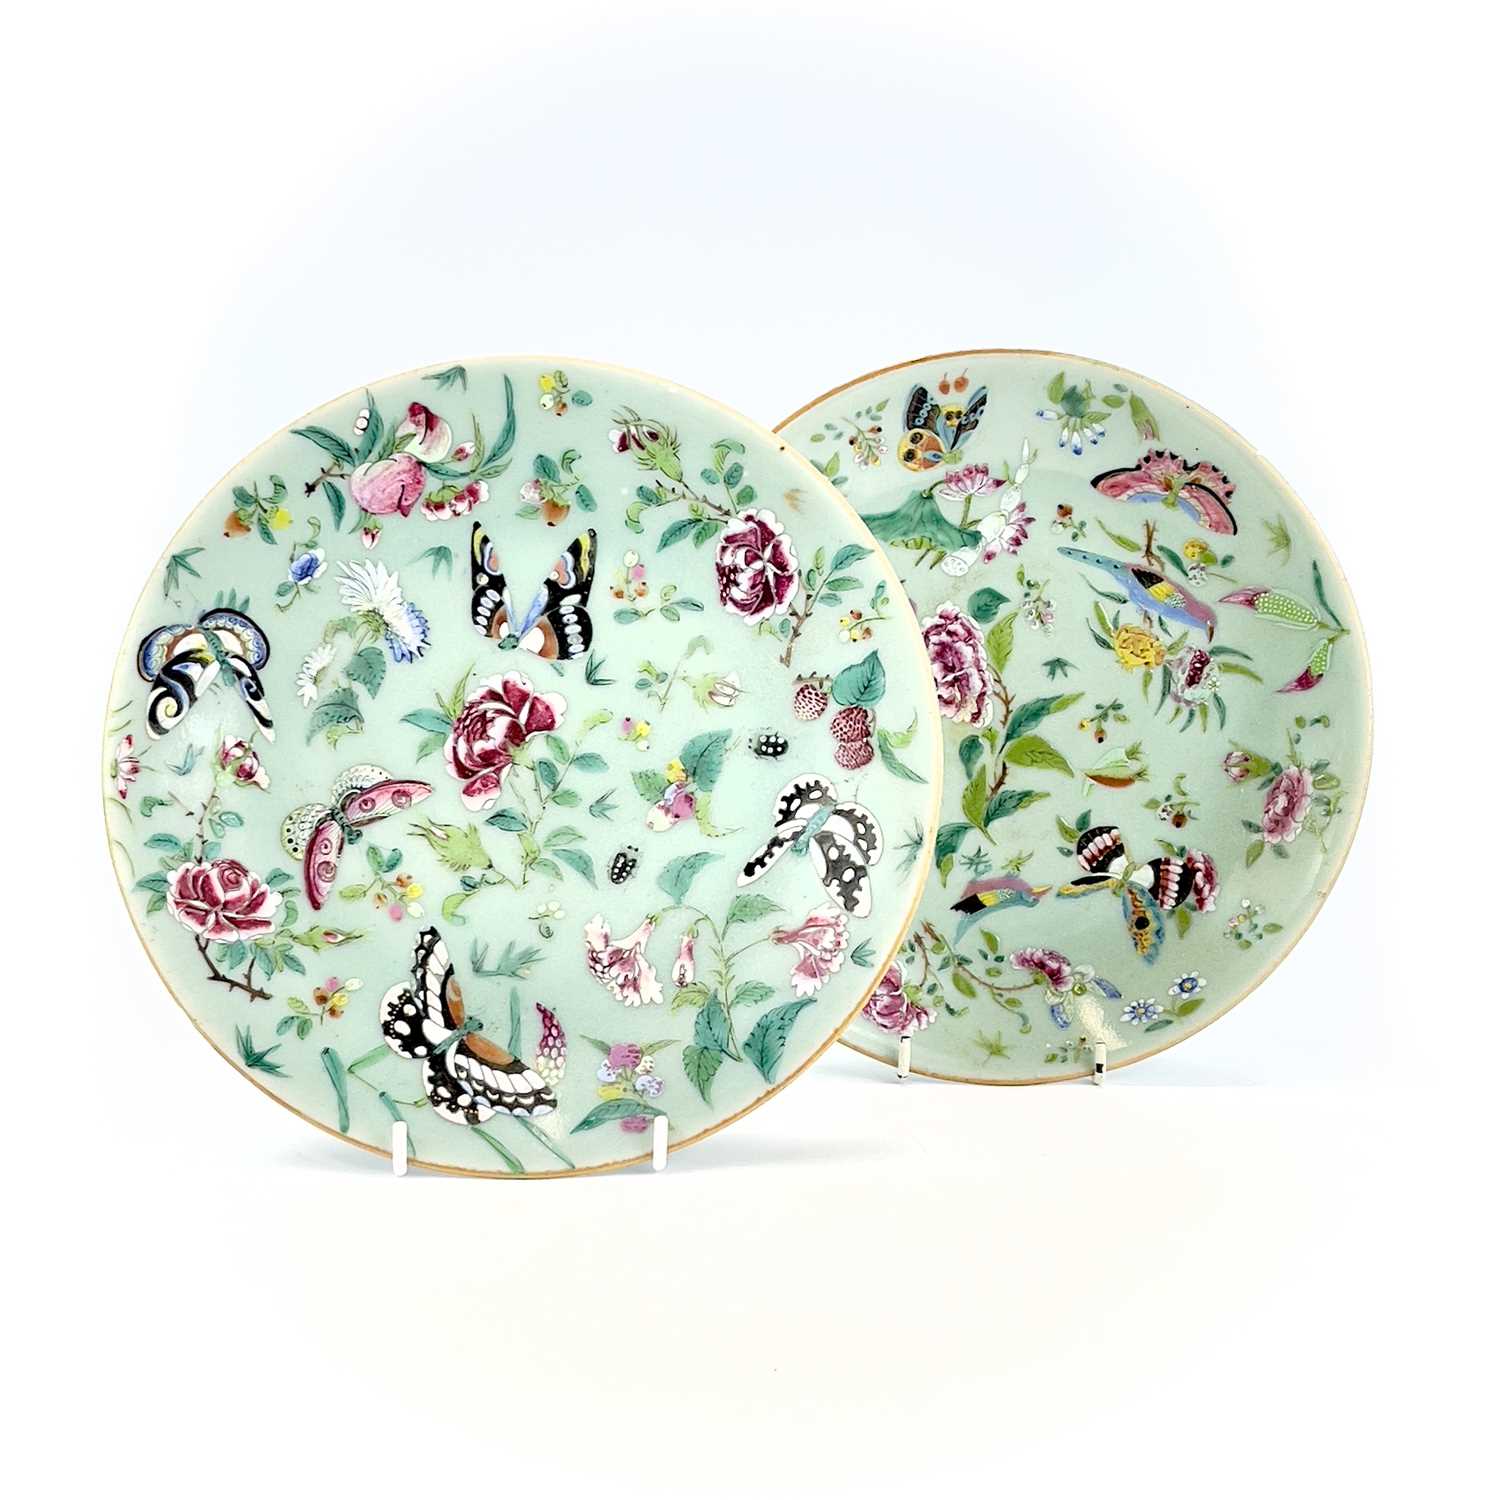 Two Chinese Canton celadon porcelain plates, 19th century, diameters 26.5cm and 25.5cm. (2)One has a